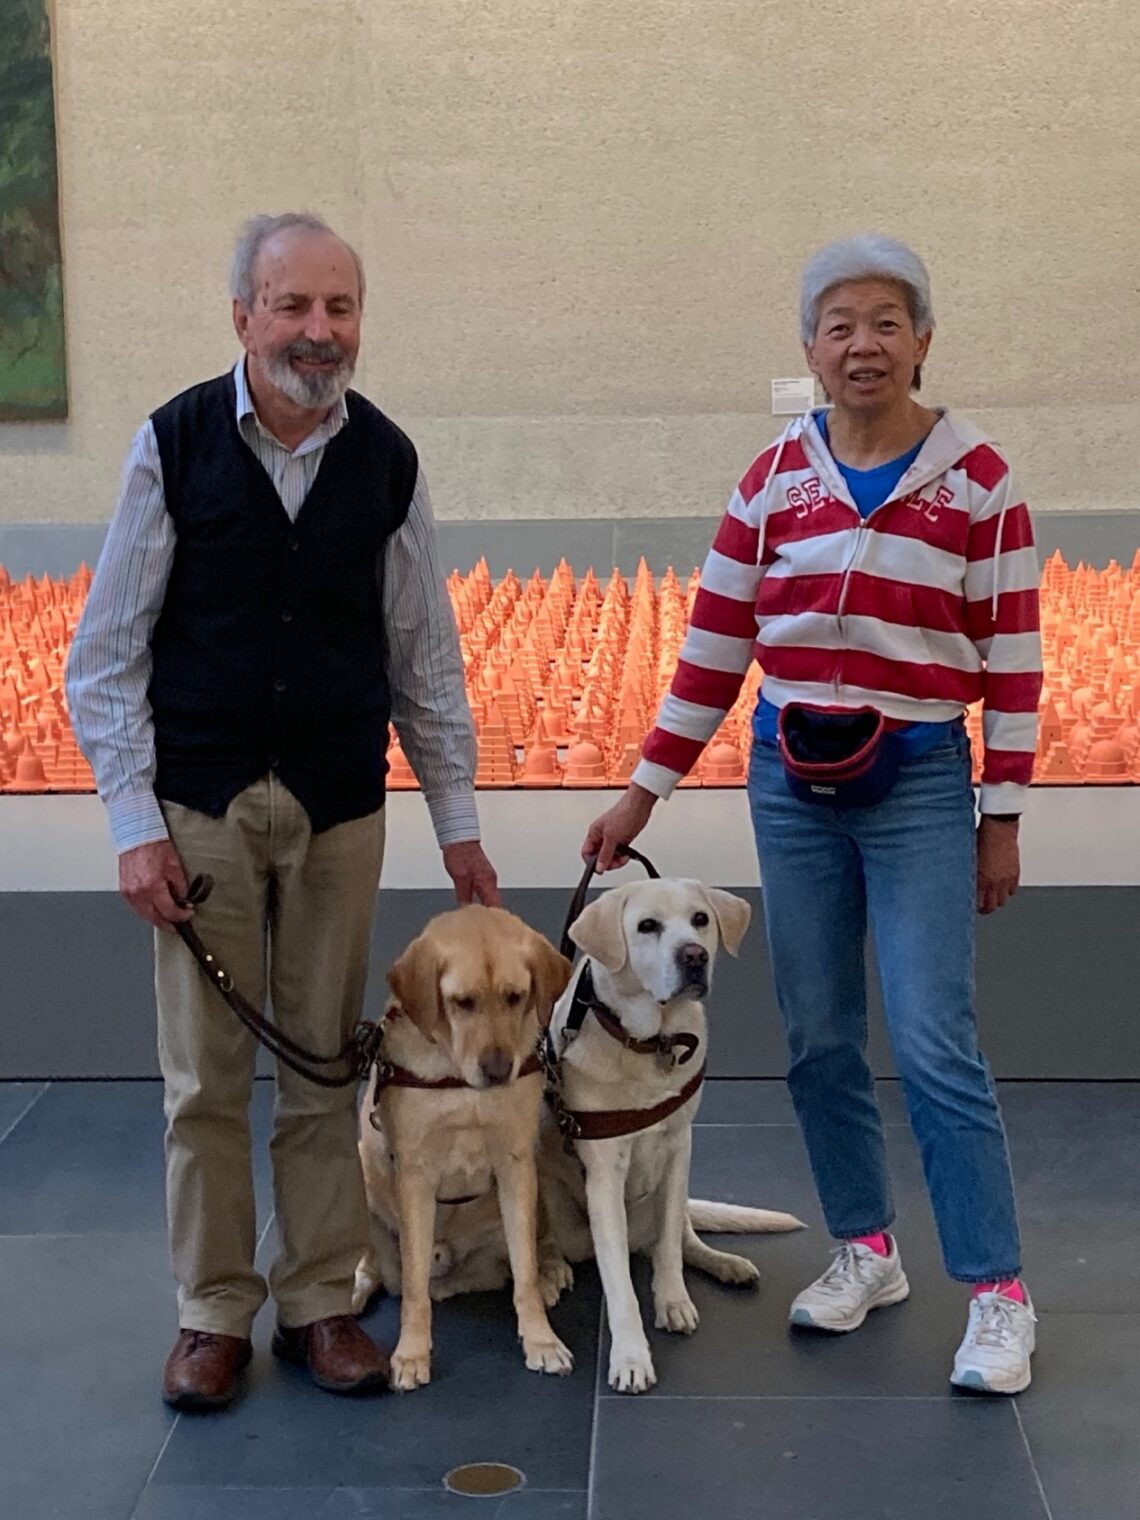 Comet and Zeke the guide dog being friends sitting with their persons at the National Gallery of Australia in front of an artwork of terracotta statures of buildings